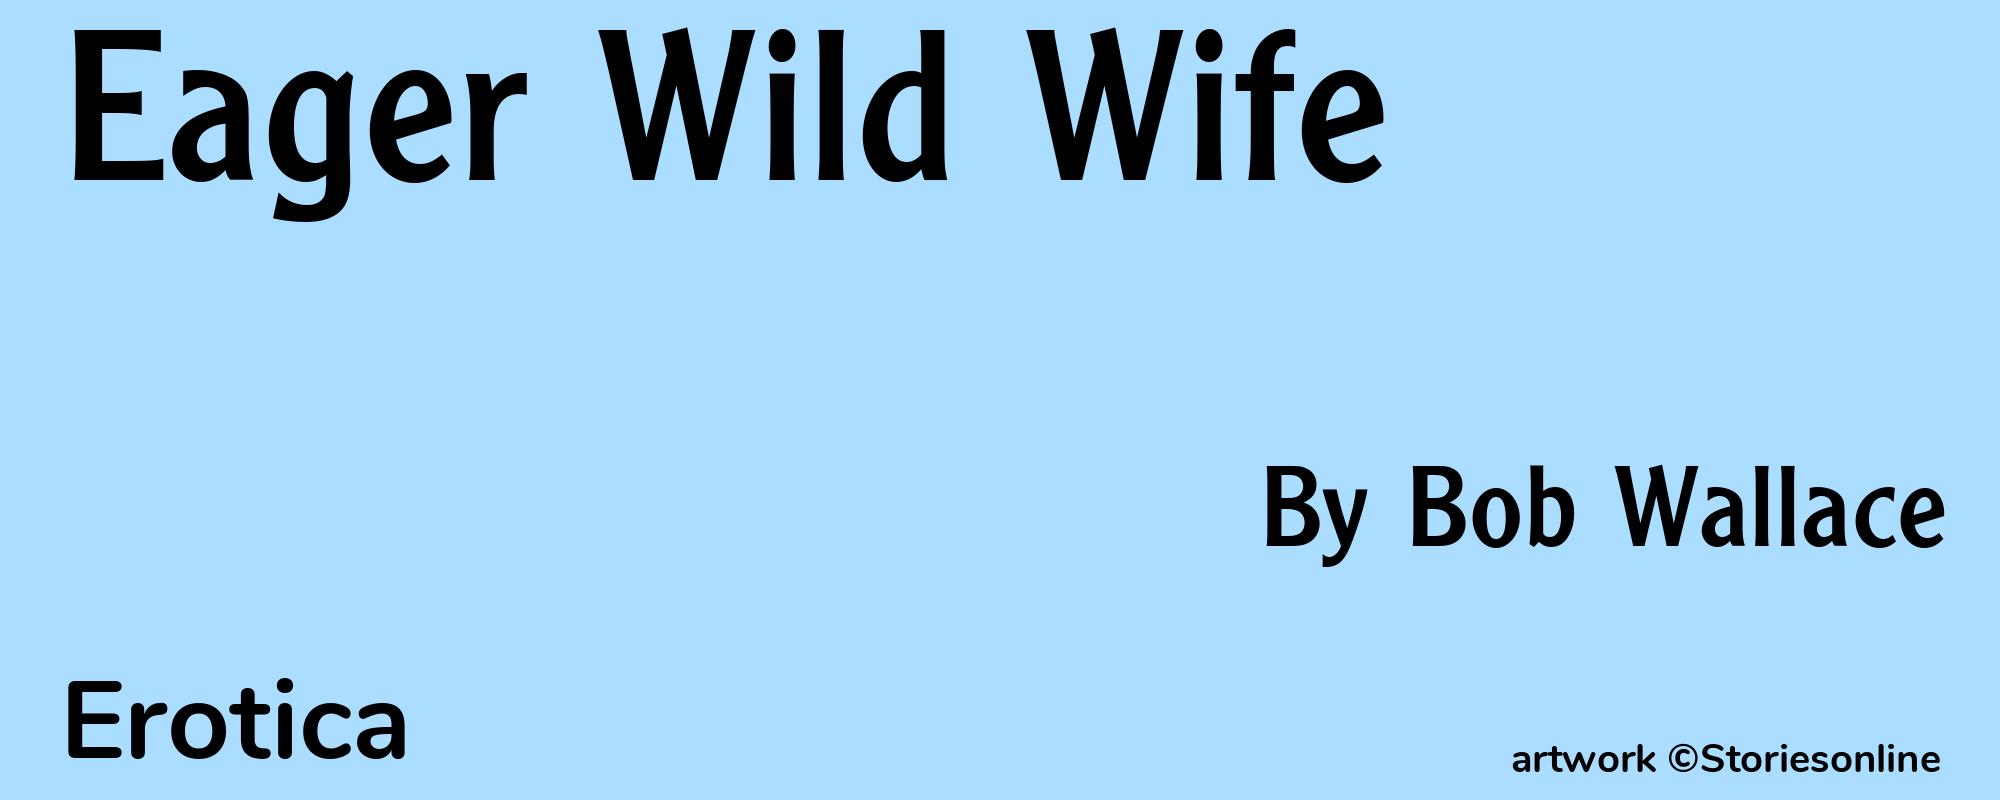 Eager Wild Wife - Cover